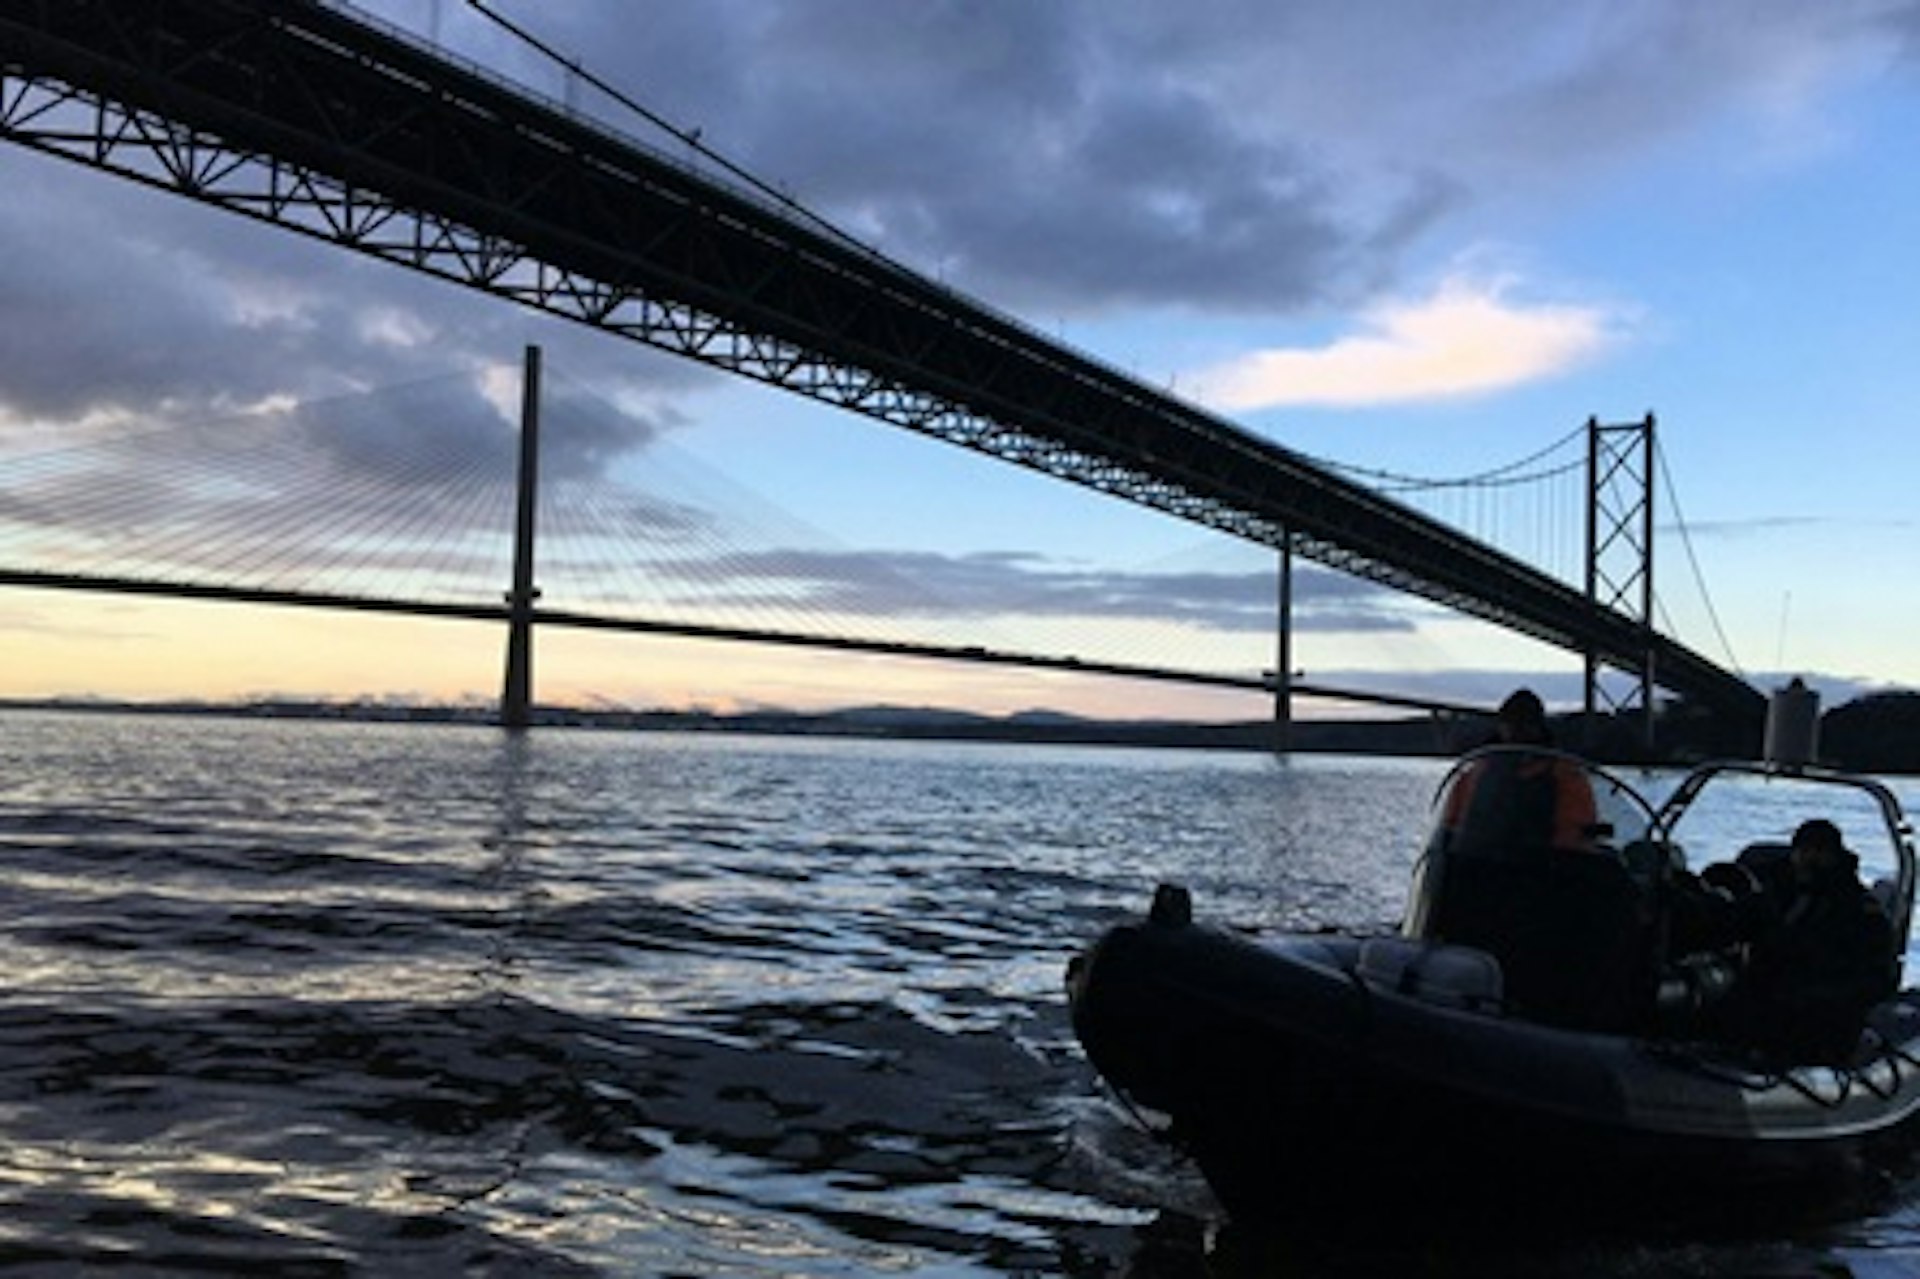 One Hour Three Bridges Sea Safari on the Forth for Two 4